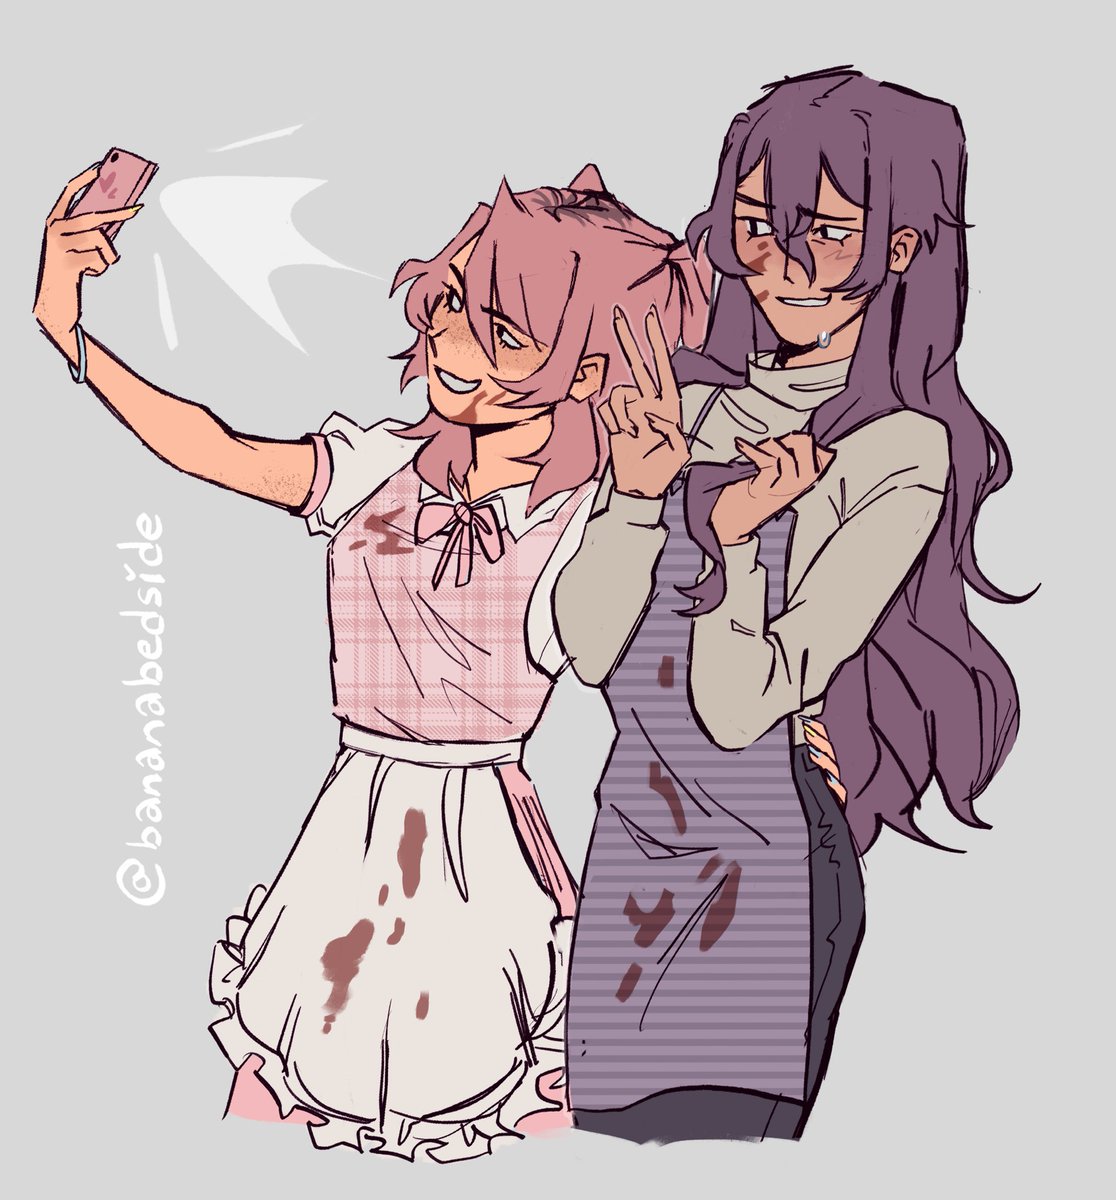 They were baking with red 40 #DDLC